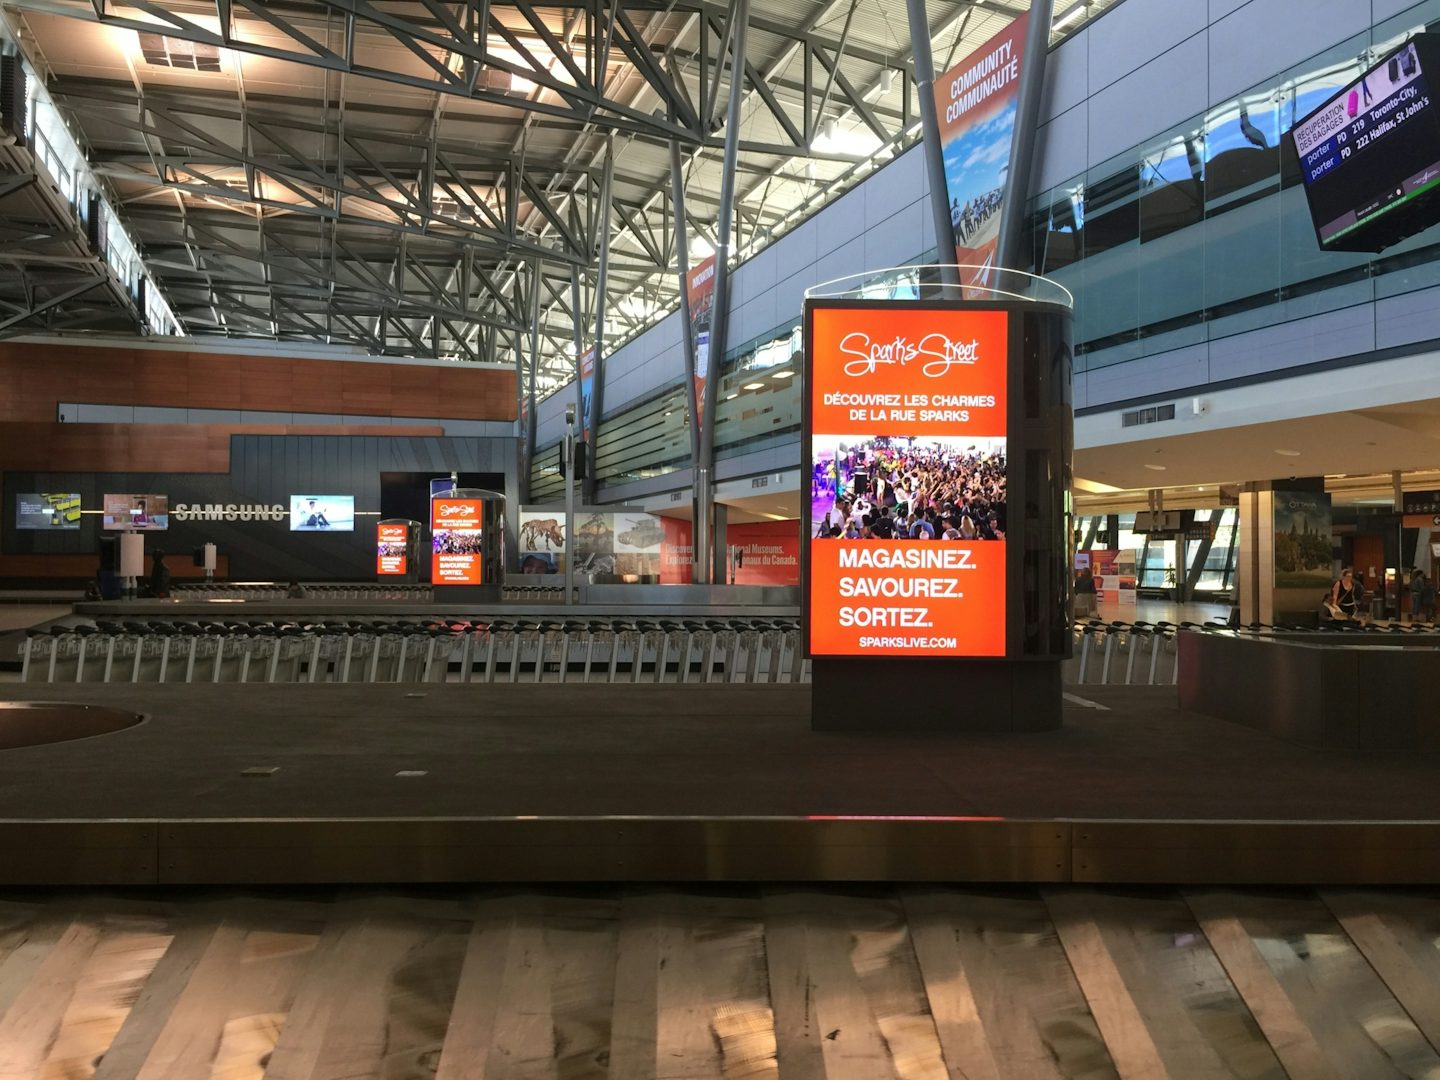 Digital Astral board featuring a Sparks Street ad at a baggage carousel at Ottawa's airport